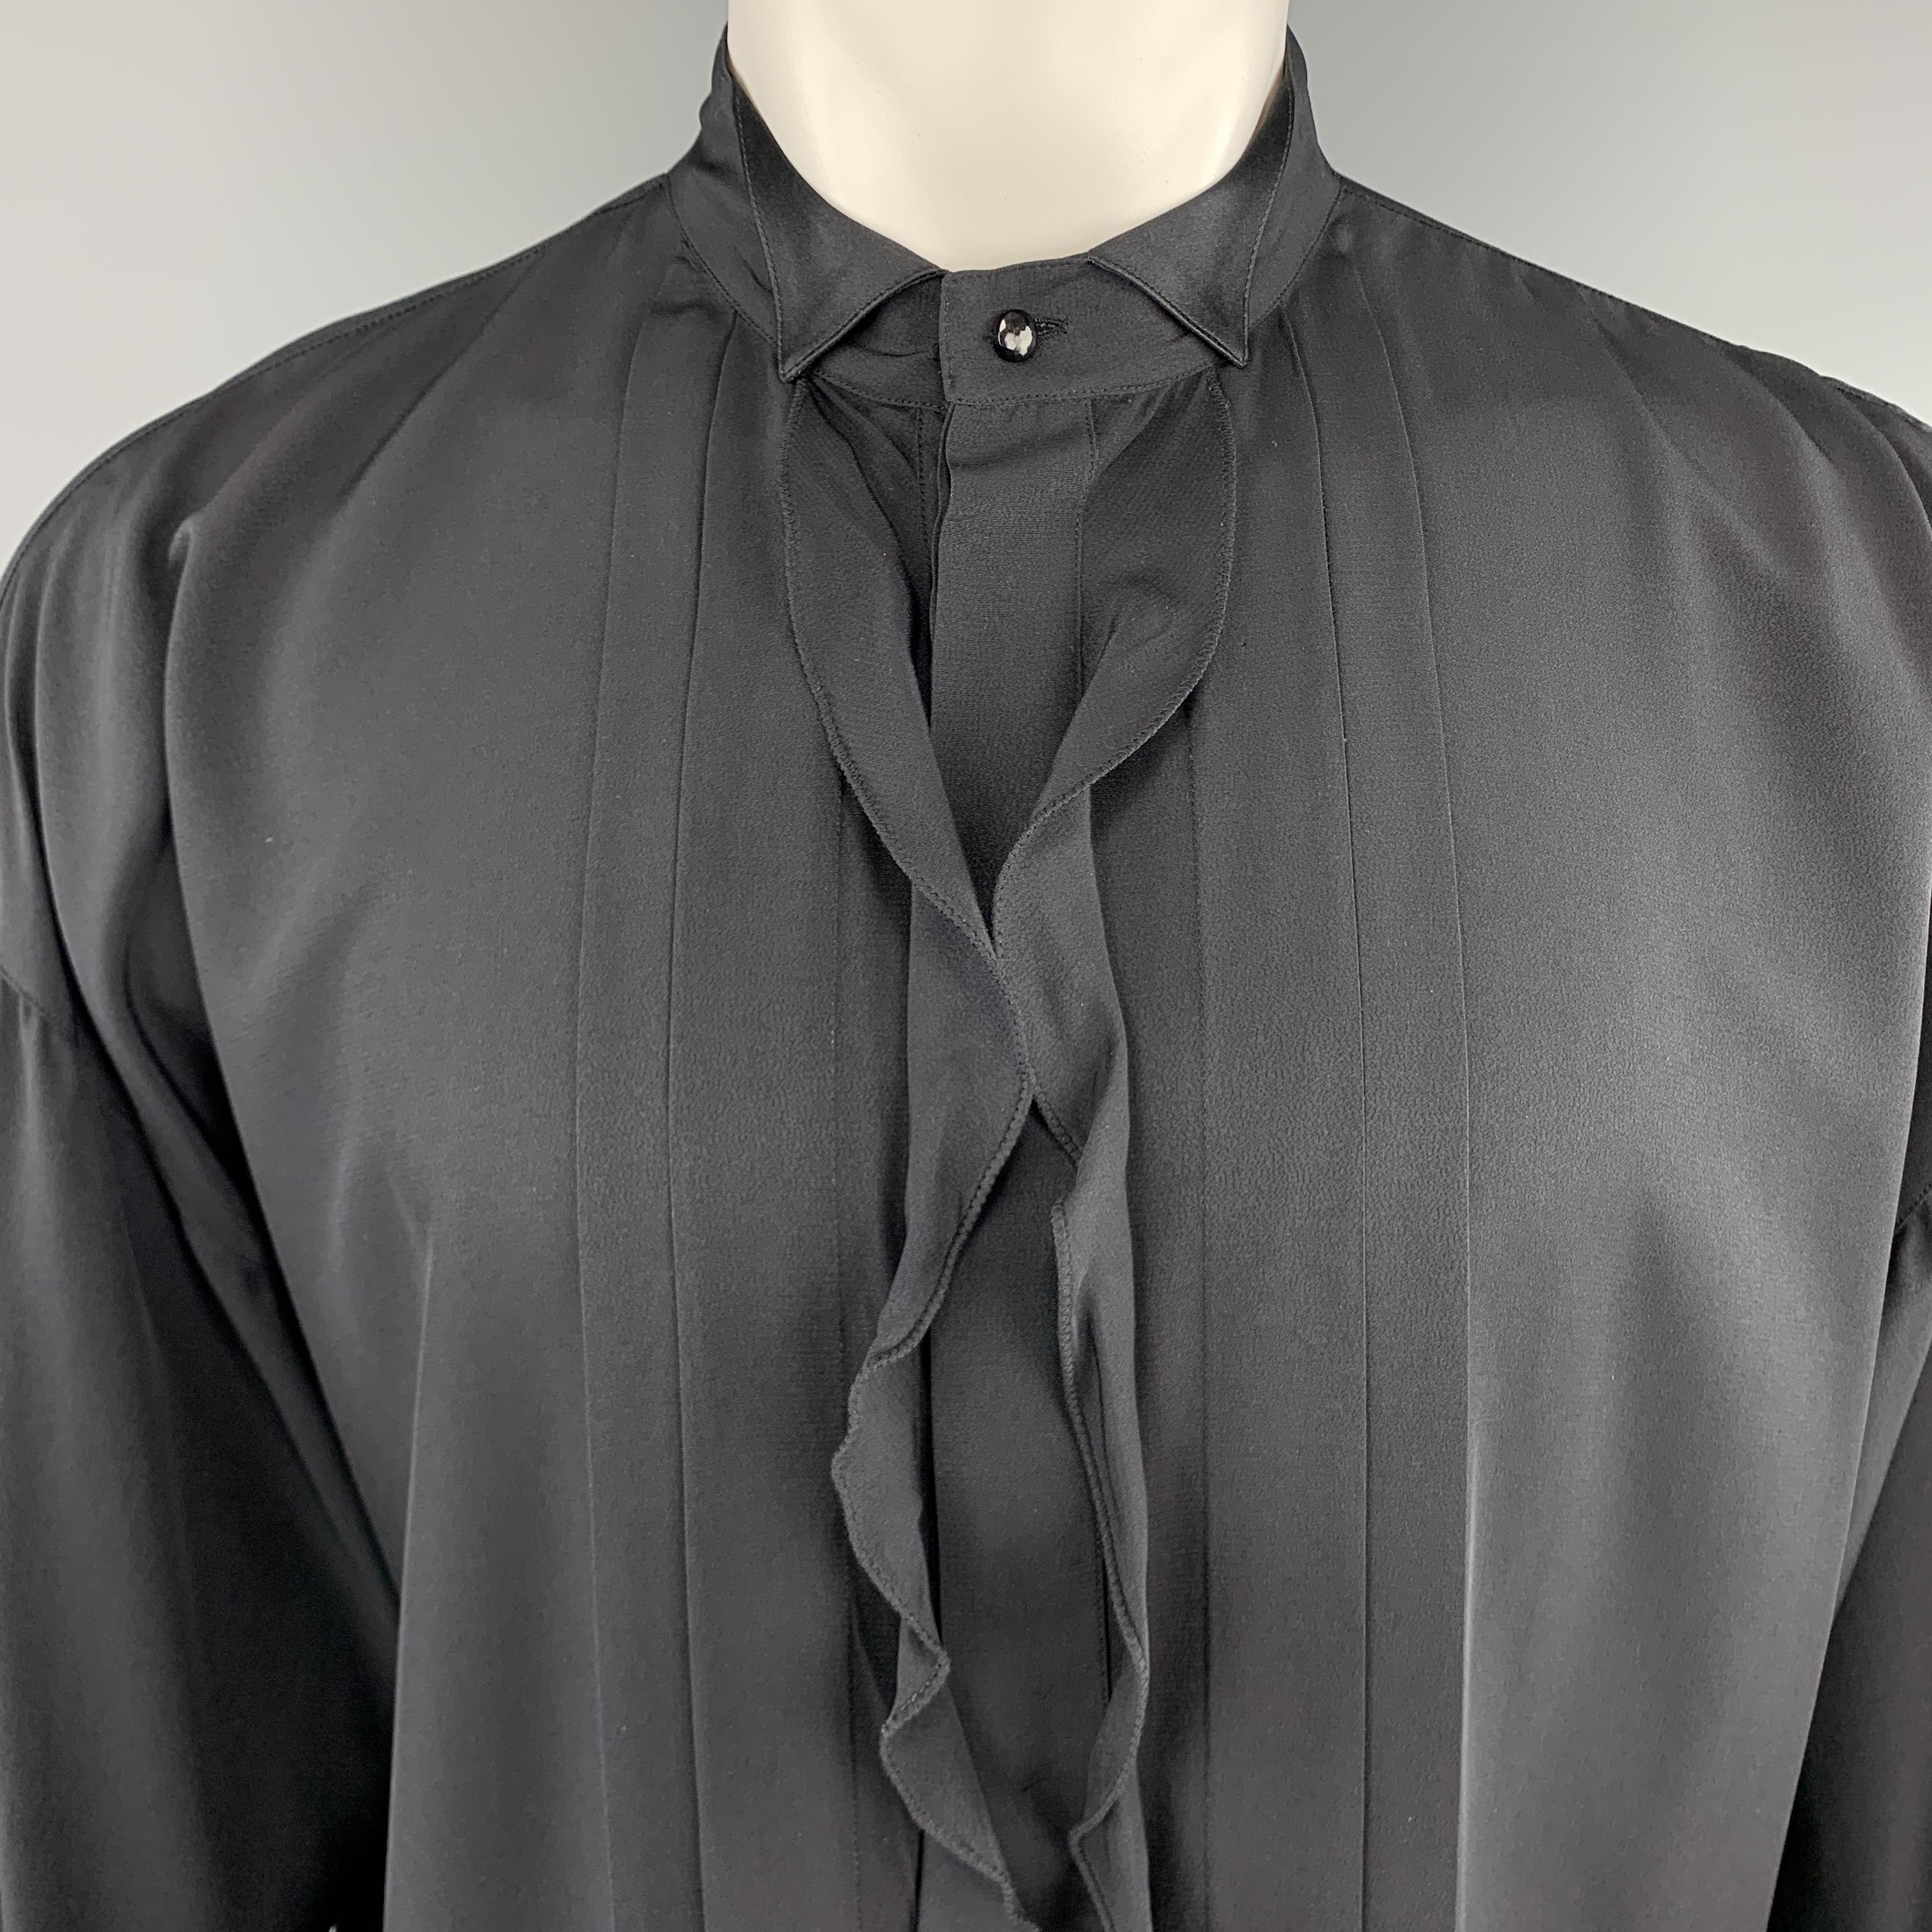 Vintage GIANNI VERSACE tuxedo shirt comes in black silk crepe with an oversized silhouette, wing tip collar, and hidden placket button front with ruffled trim and pleated detail. Made in Italy.

Very Good Pre-Owned Condition.
Marked: IT